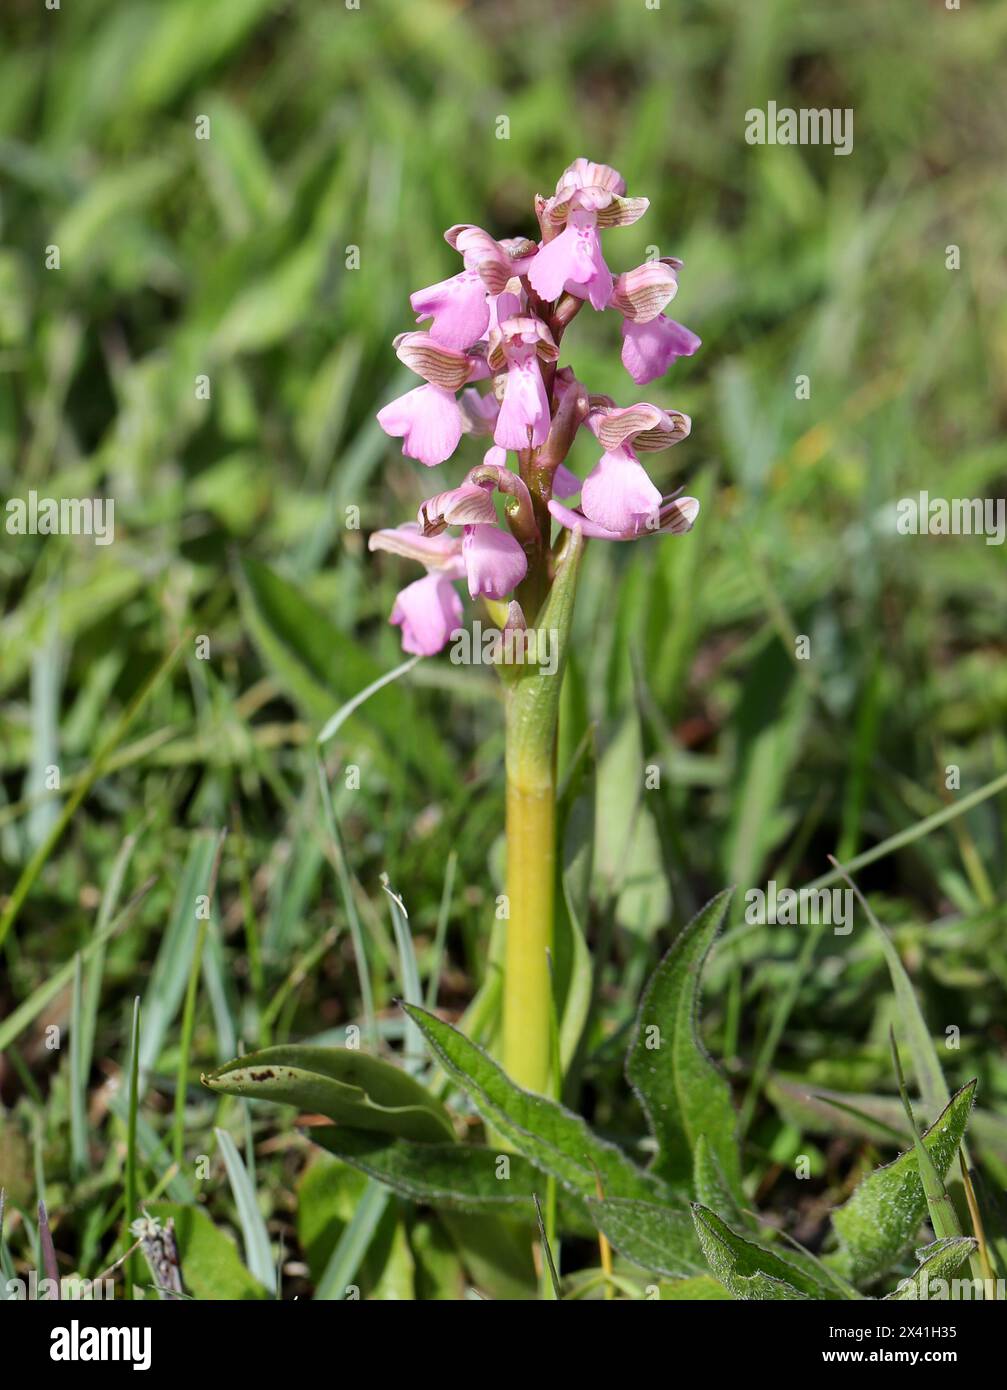 Green-winged Orchid or Green-veined Orchid, Anacamptis morio (Orchis morio), Orchidaceae. Bernwood Meadows, Oxfordshire, UK. Pink Variation. Stock Photo